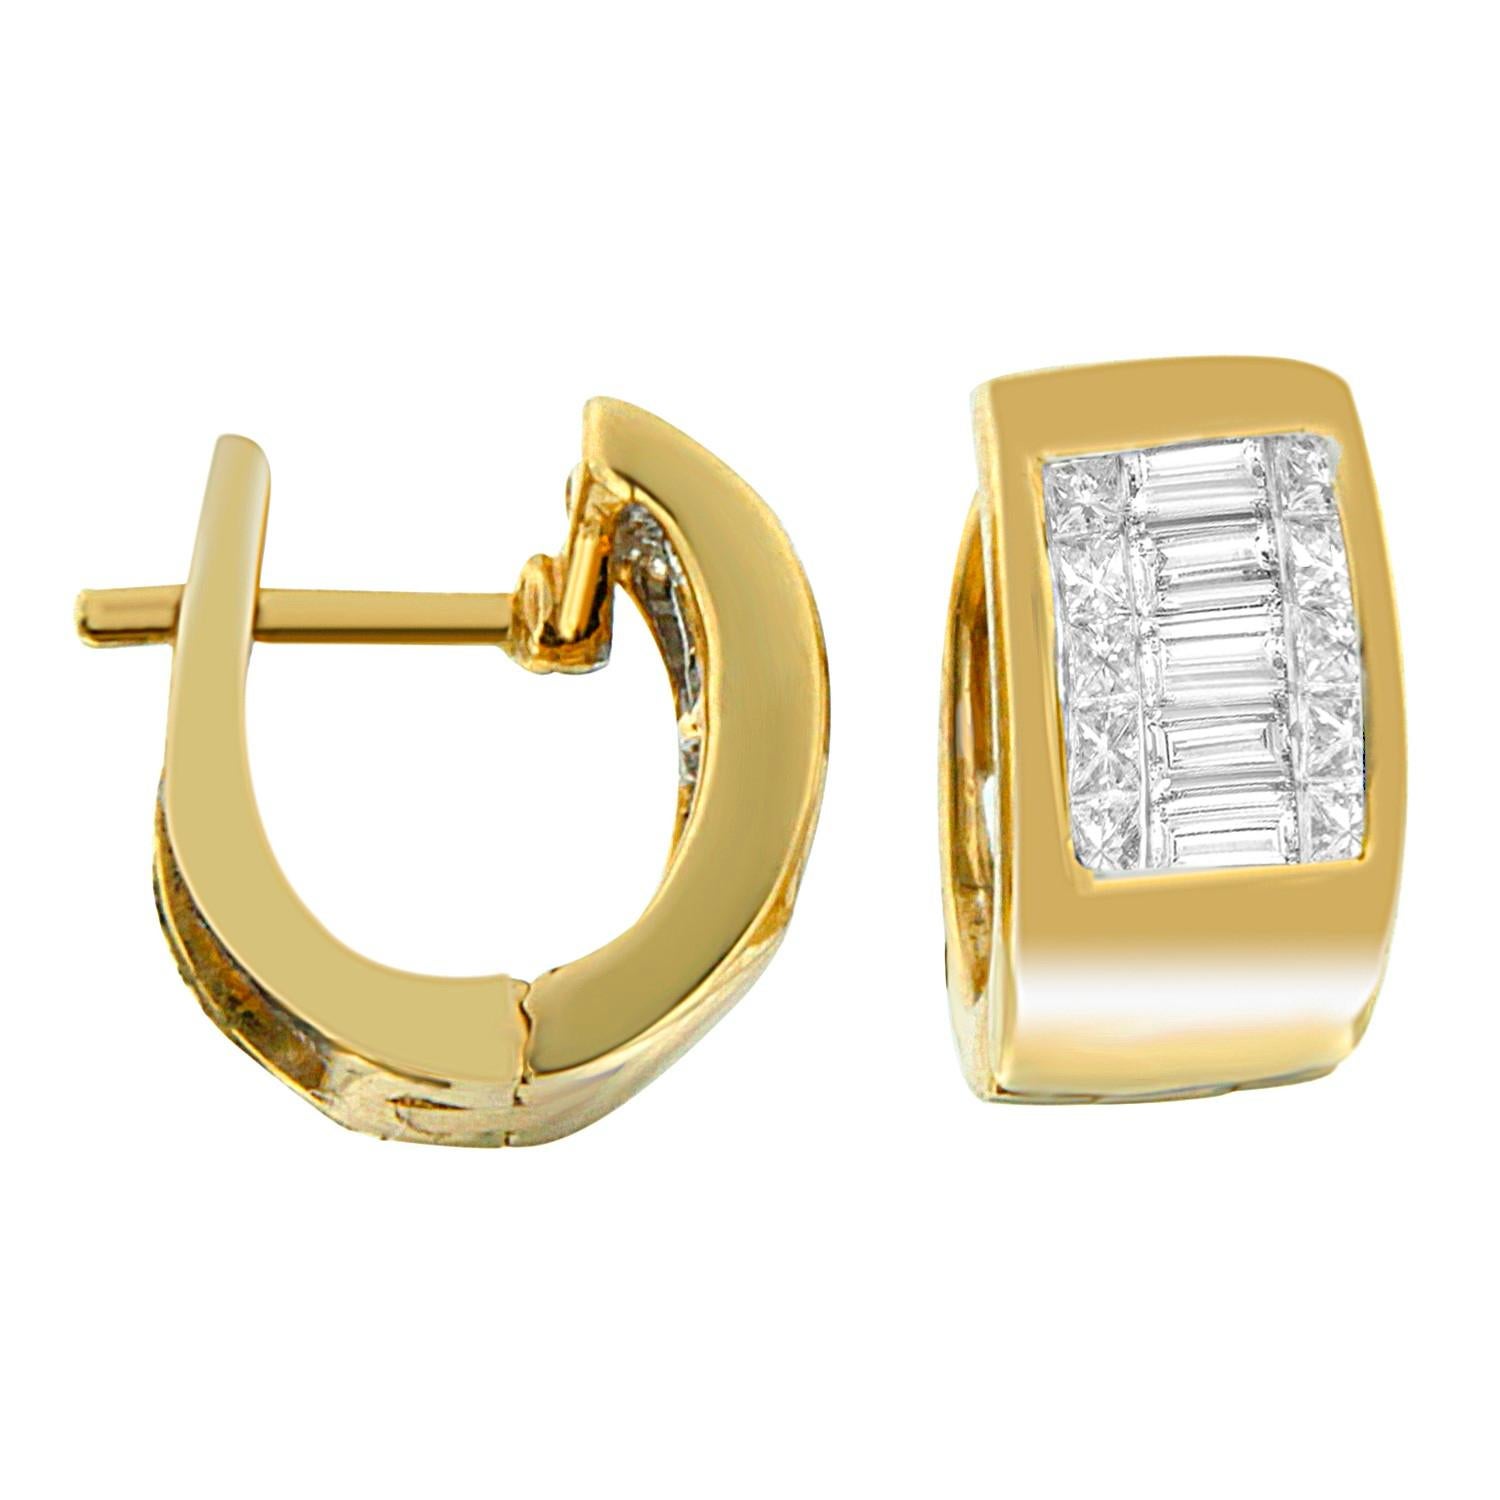 Flaunt your never-ending love for classy diamonds by wearing these alluring diamond earrings. These 14k yellow gold diamond earrings are designed with 1/2ct princess and baguette cut that makes them look more unique. The fine yellow gold finishing